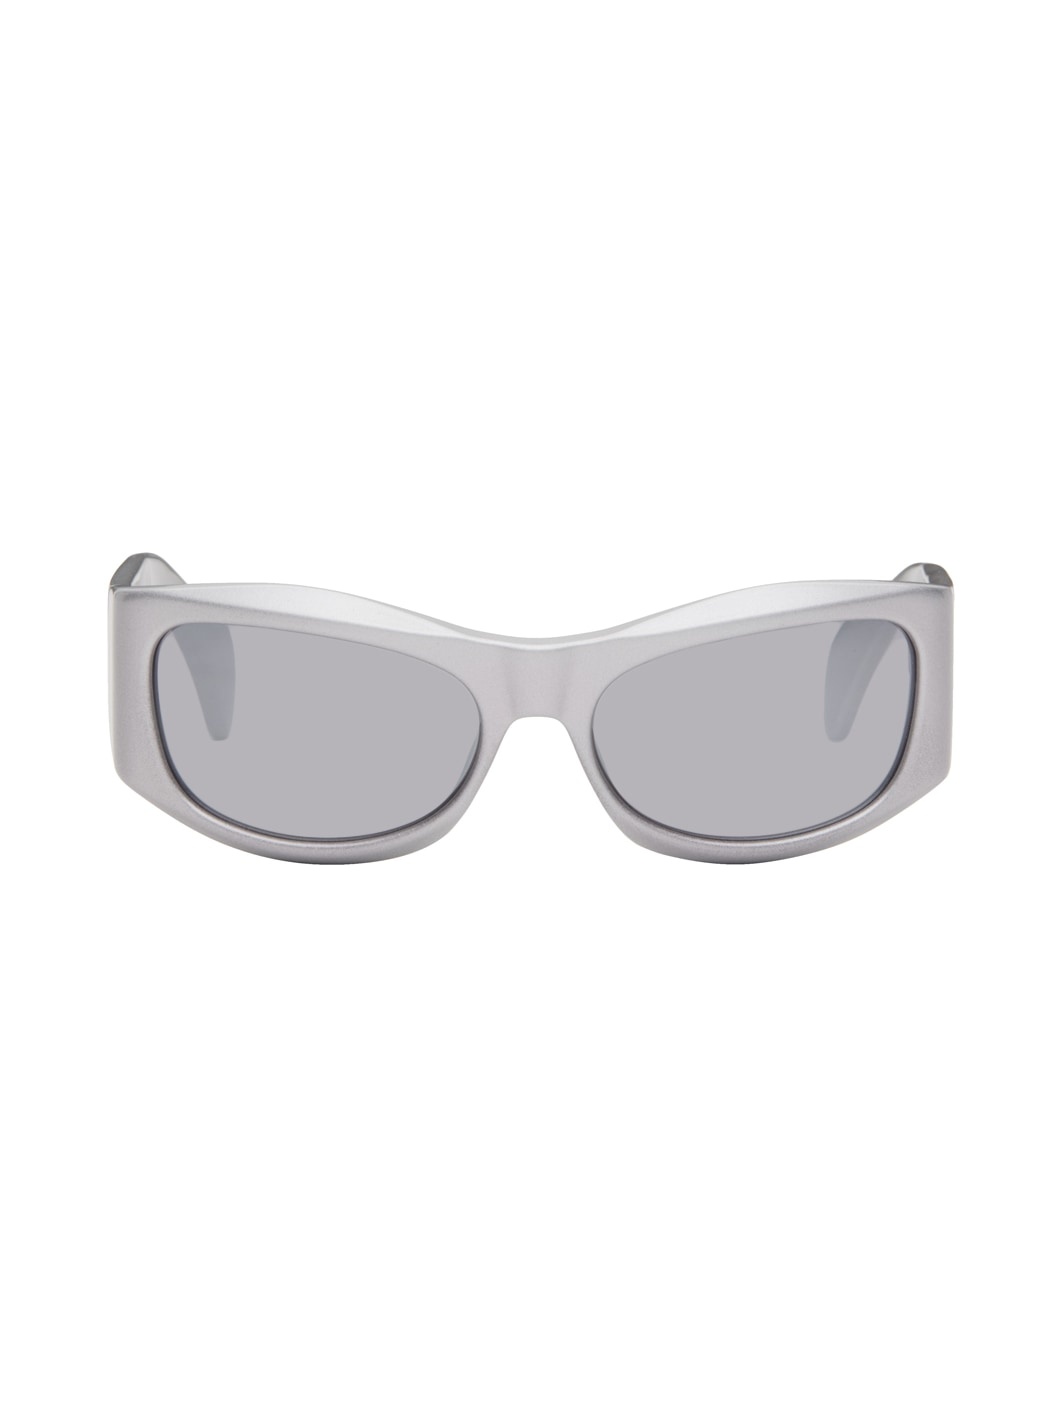 Silver Aether Sunglasses - 1